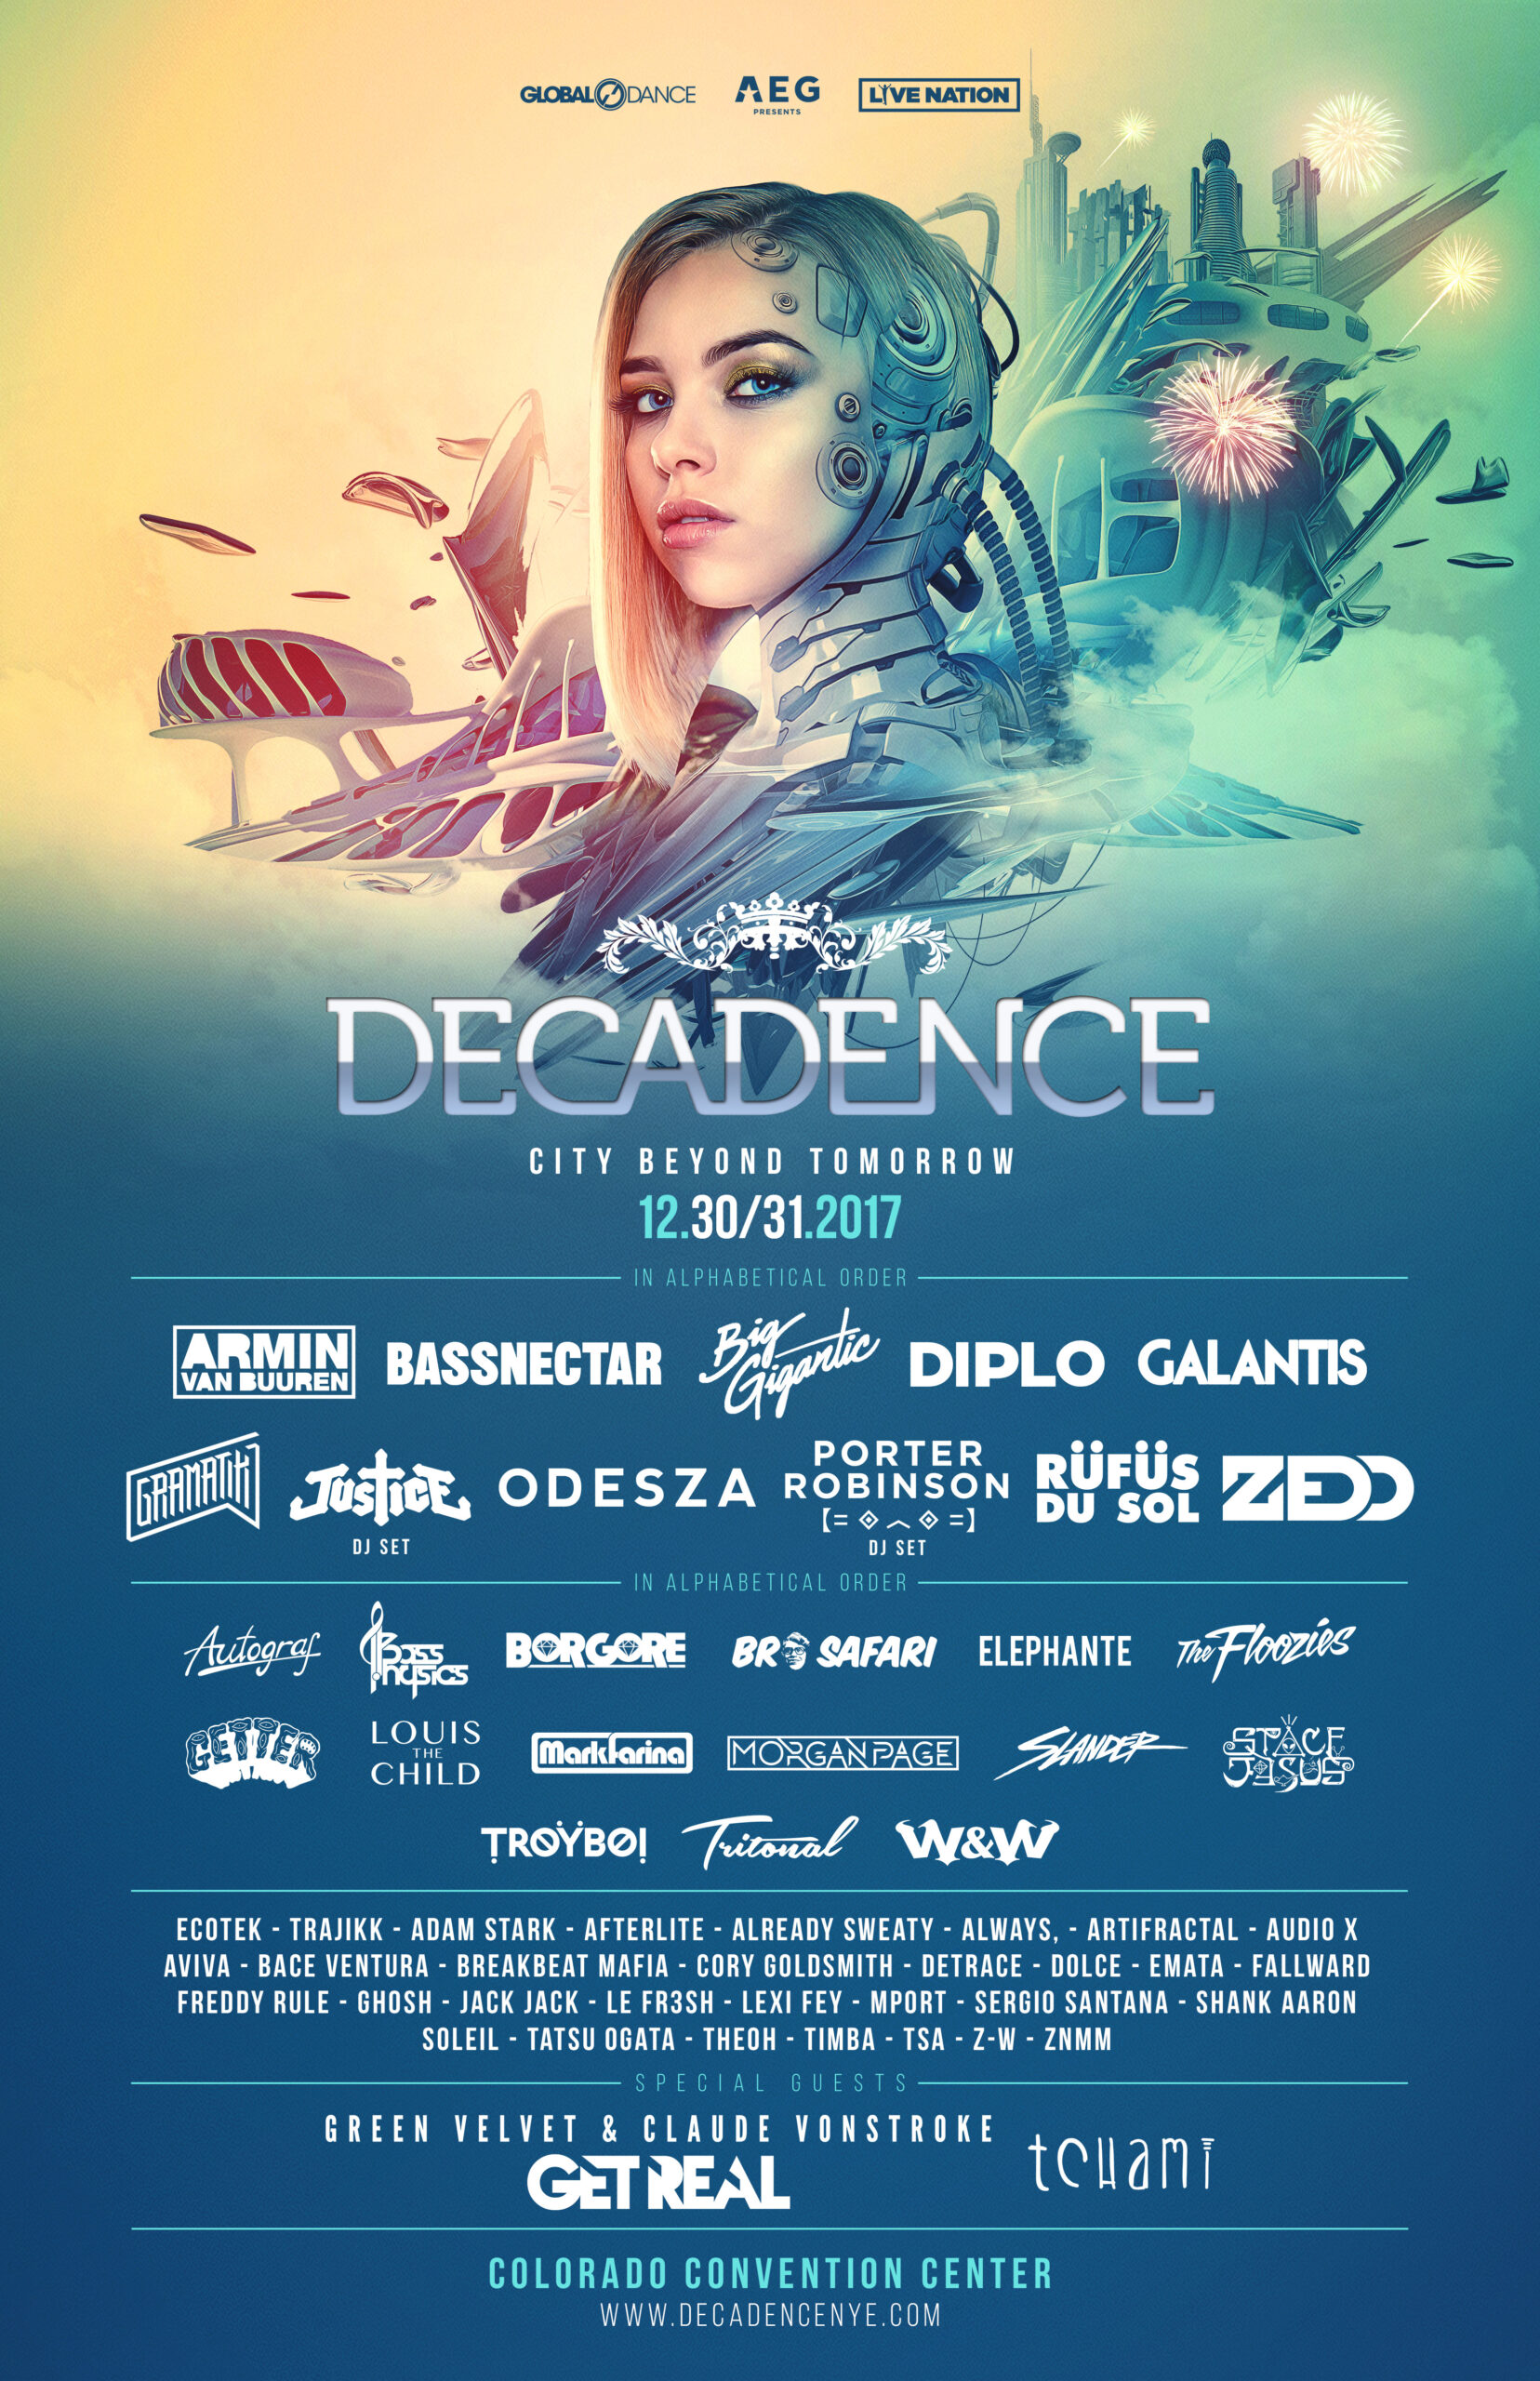 Decadence 2017 Lineup Poster. Photo provided.